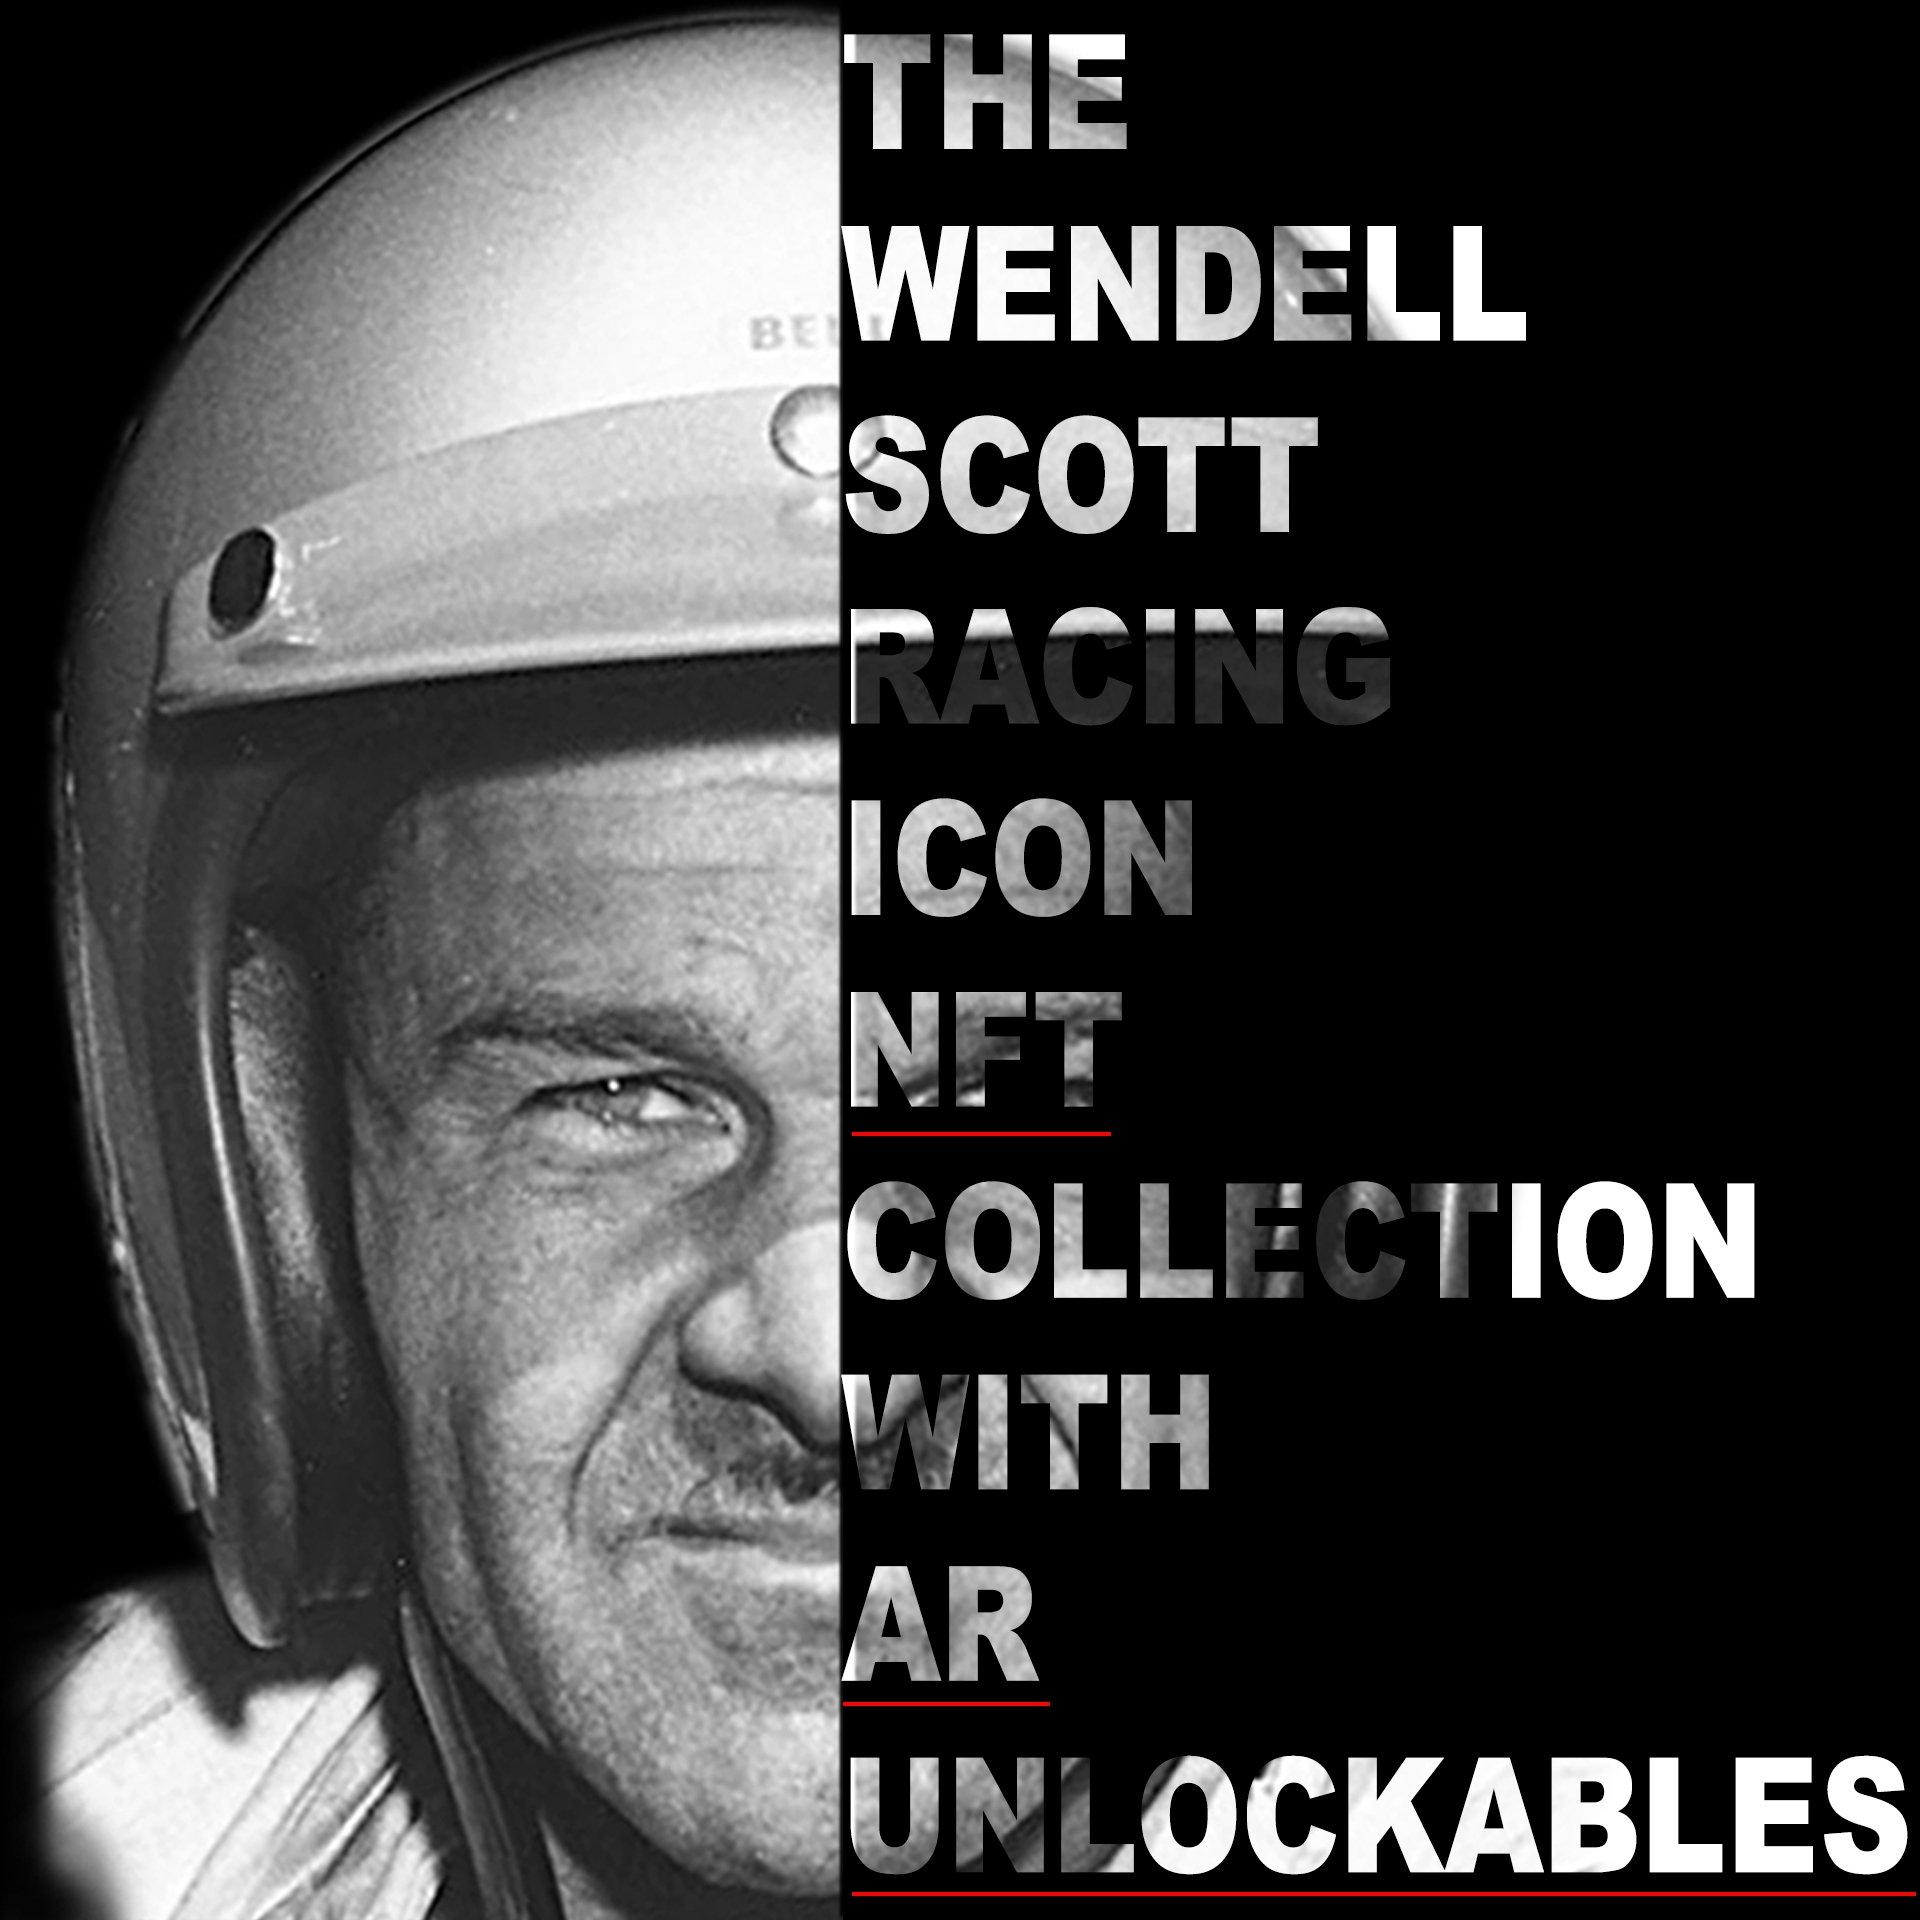 Poster featuring NASCAR icon Wendell Scott